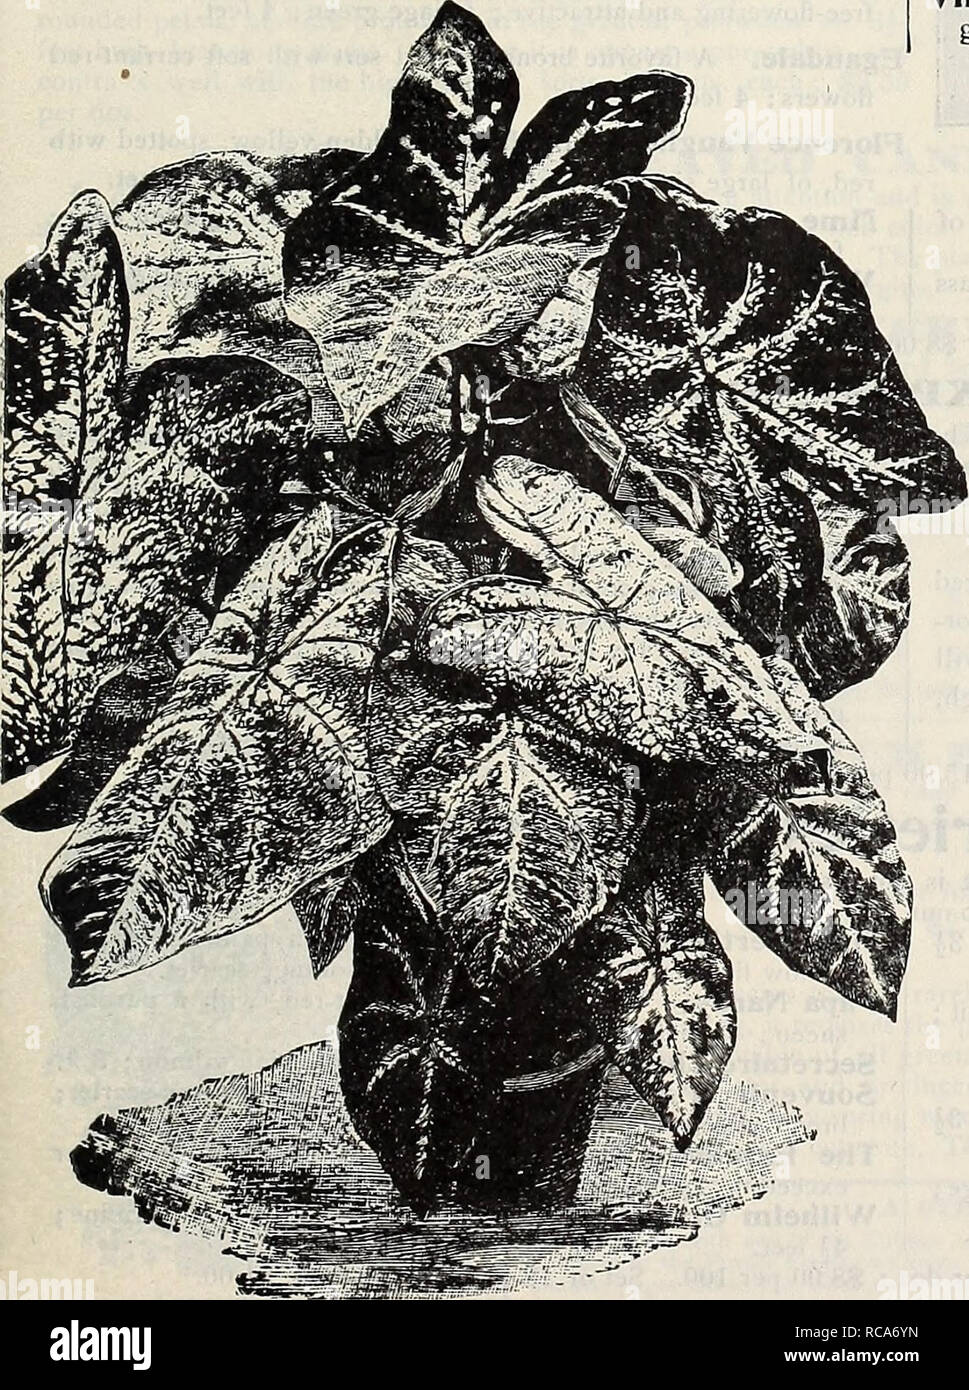 . Dreer's garden book : 1906. Seeds Catalogs; Nursery stock Catalogs; Gardening Equipment and supplies Catalogs; Flowers Seeds Catalogs; Vegetables Seeds Catalogs; Fruit Seeds Catalogs. 35 cts.. Fancy-leaved Caladiums. CAREX. Japonica Variegata. An ornamental Japanese grass, which is extremely uselul as a house plant, of easy growth, standing the dry atmosphere of heated rooms with impunity, and at the same lime hardy if planted out in the garden in summer. Vilmorinl. A pretty and distinct variety, with long, slender, gray-green, graceful, drooping foliage. 15 cts. each ; $1.50 per doz. SEI.EC Stock Photo